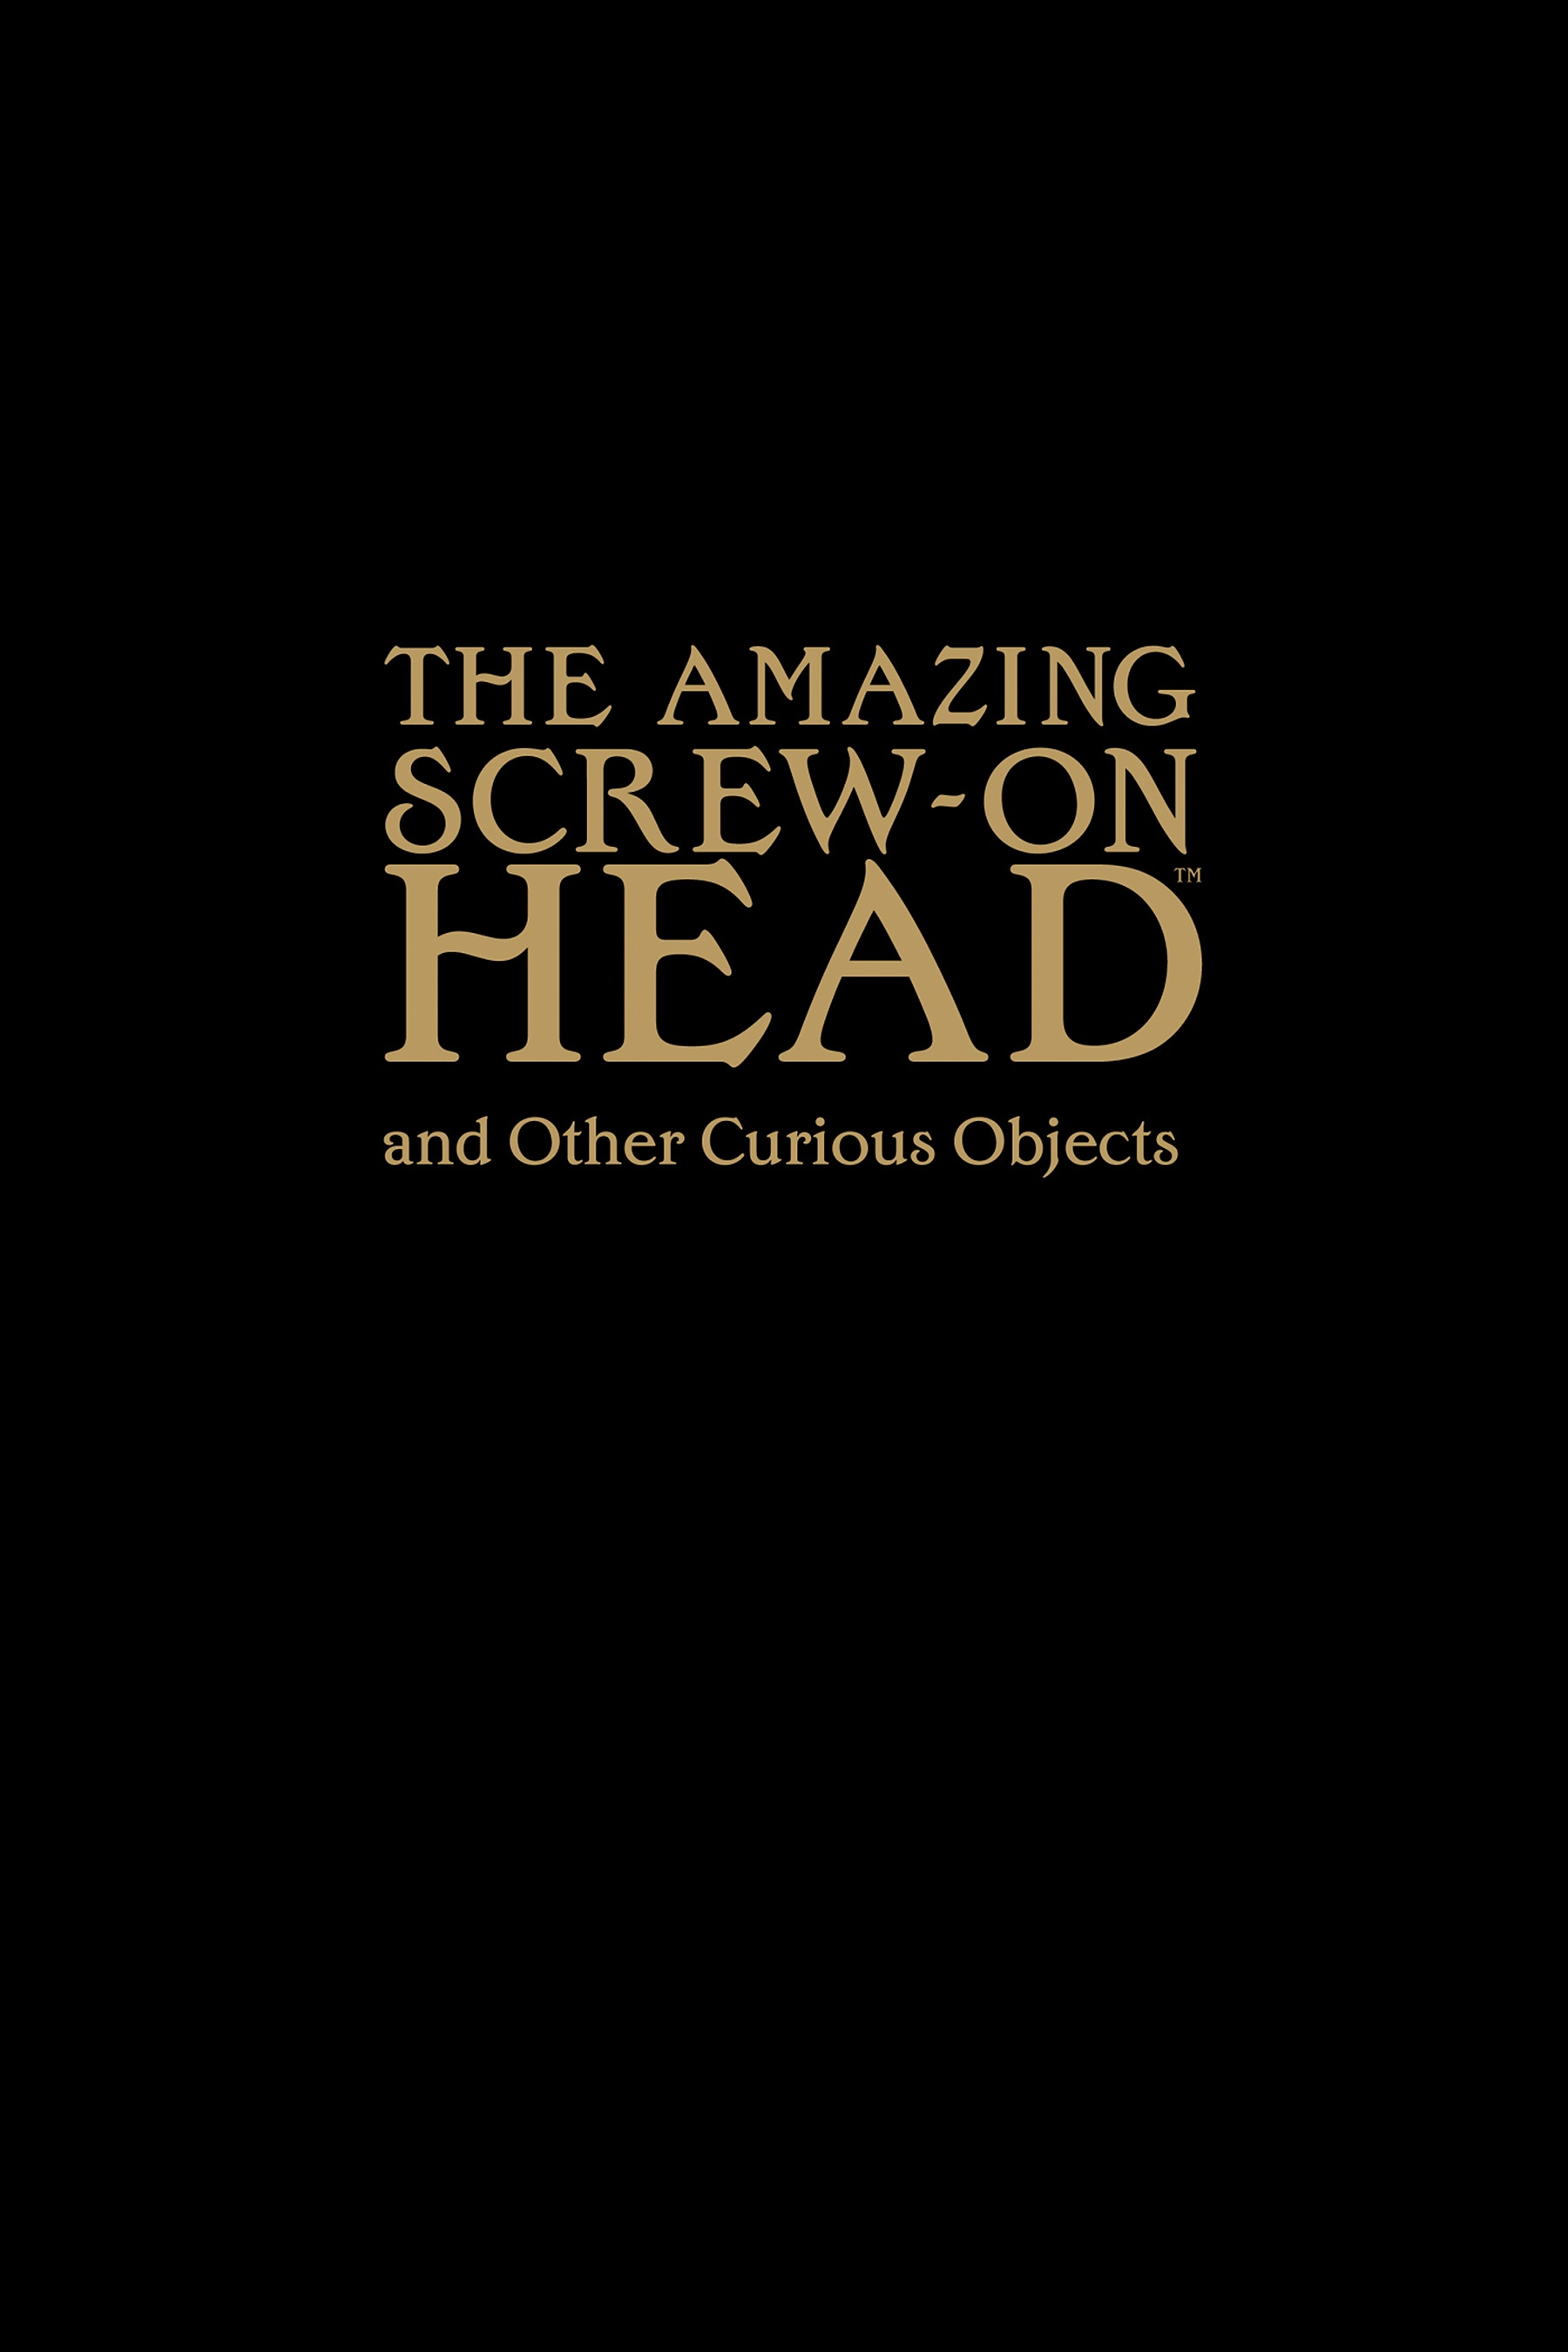 Read online The Amazing Screw-On Head and Other Curious Objects (Anniversary Edition) comic -  Issue # TPB - 3